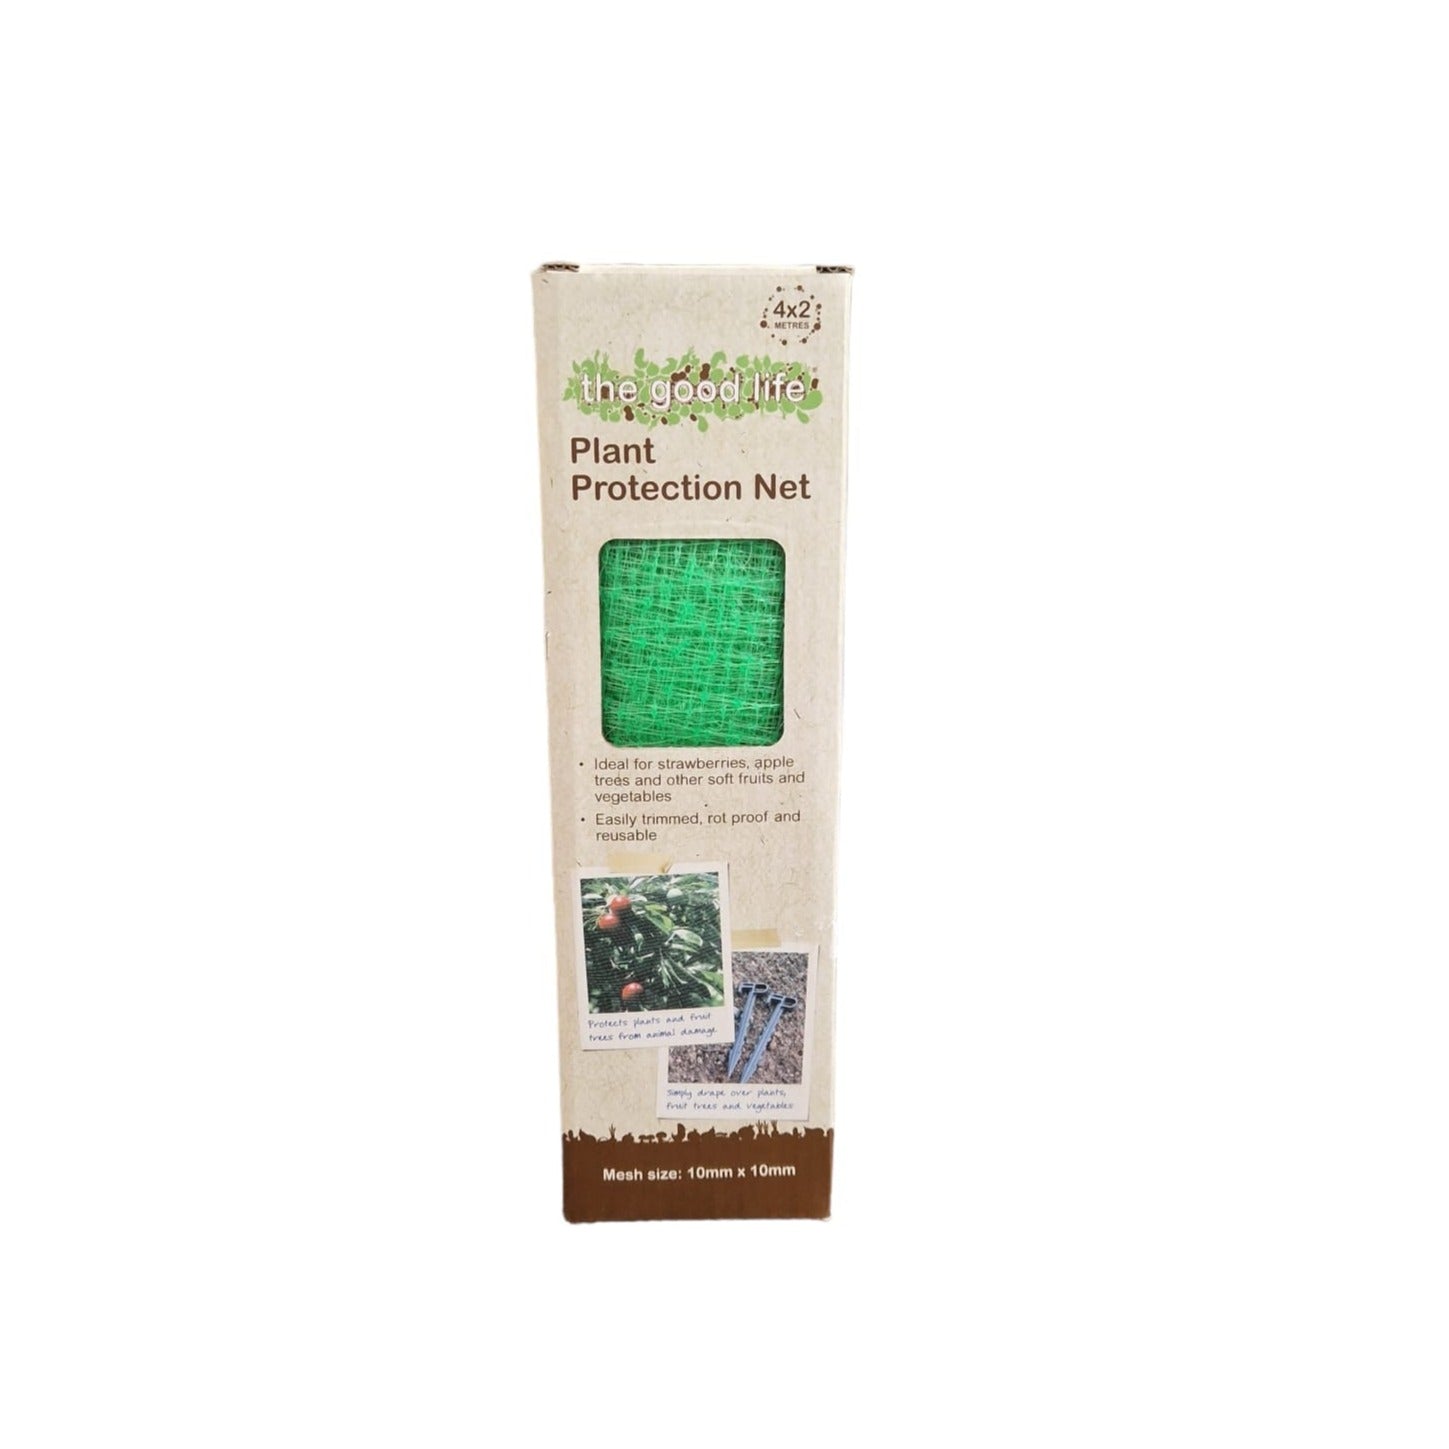 The Good Life Plant Protection Net 4m x 2m